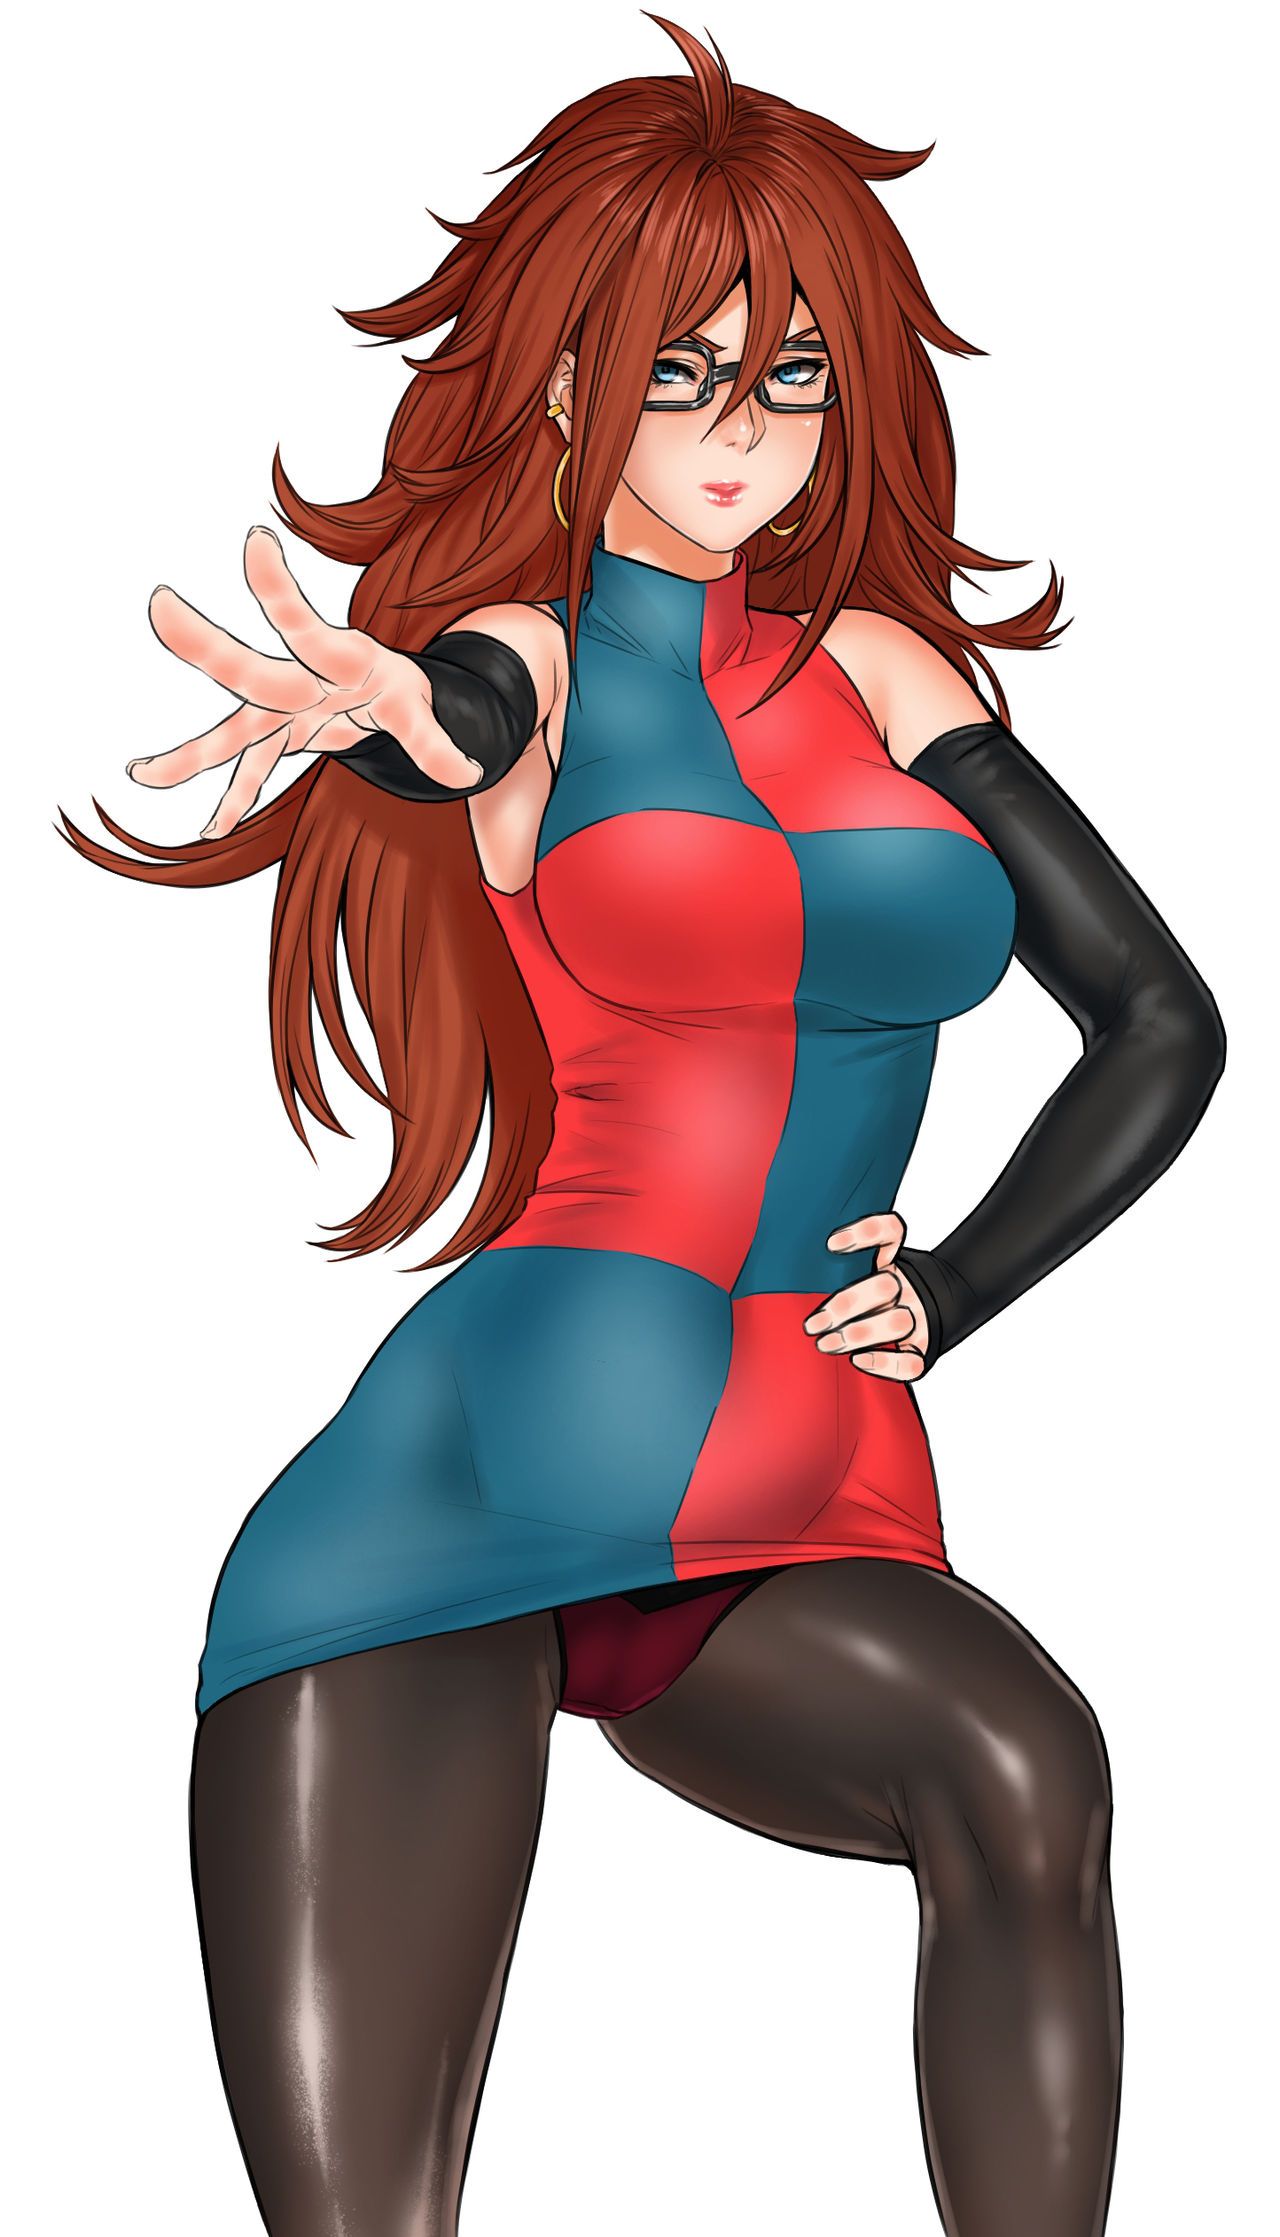 My Favorite Android 21 Pics 23